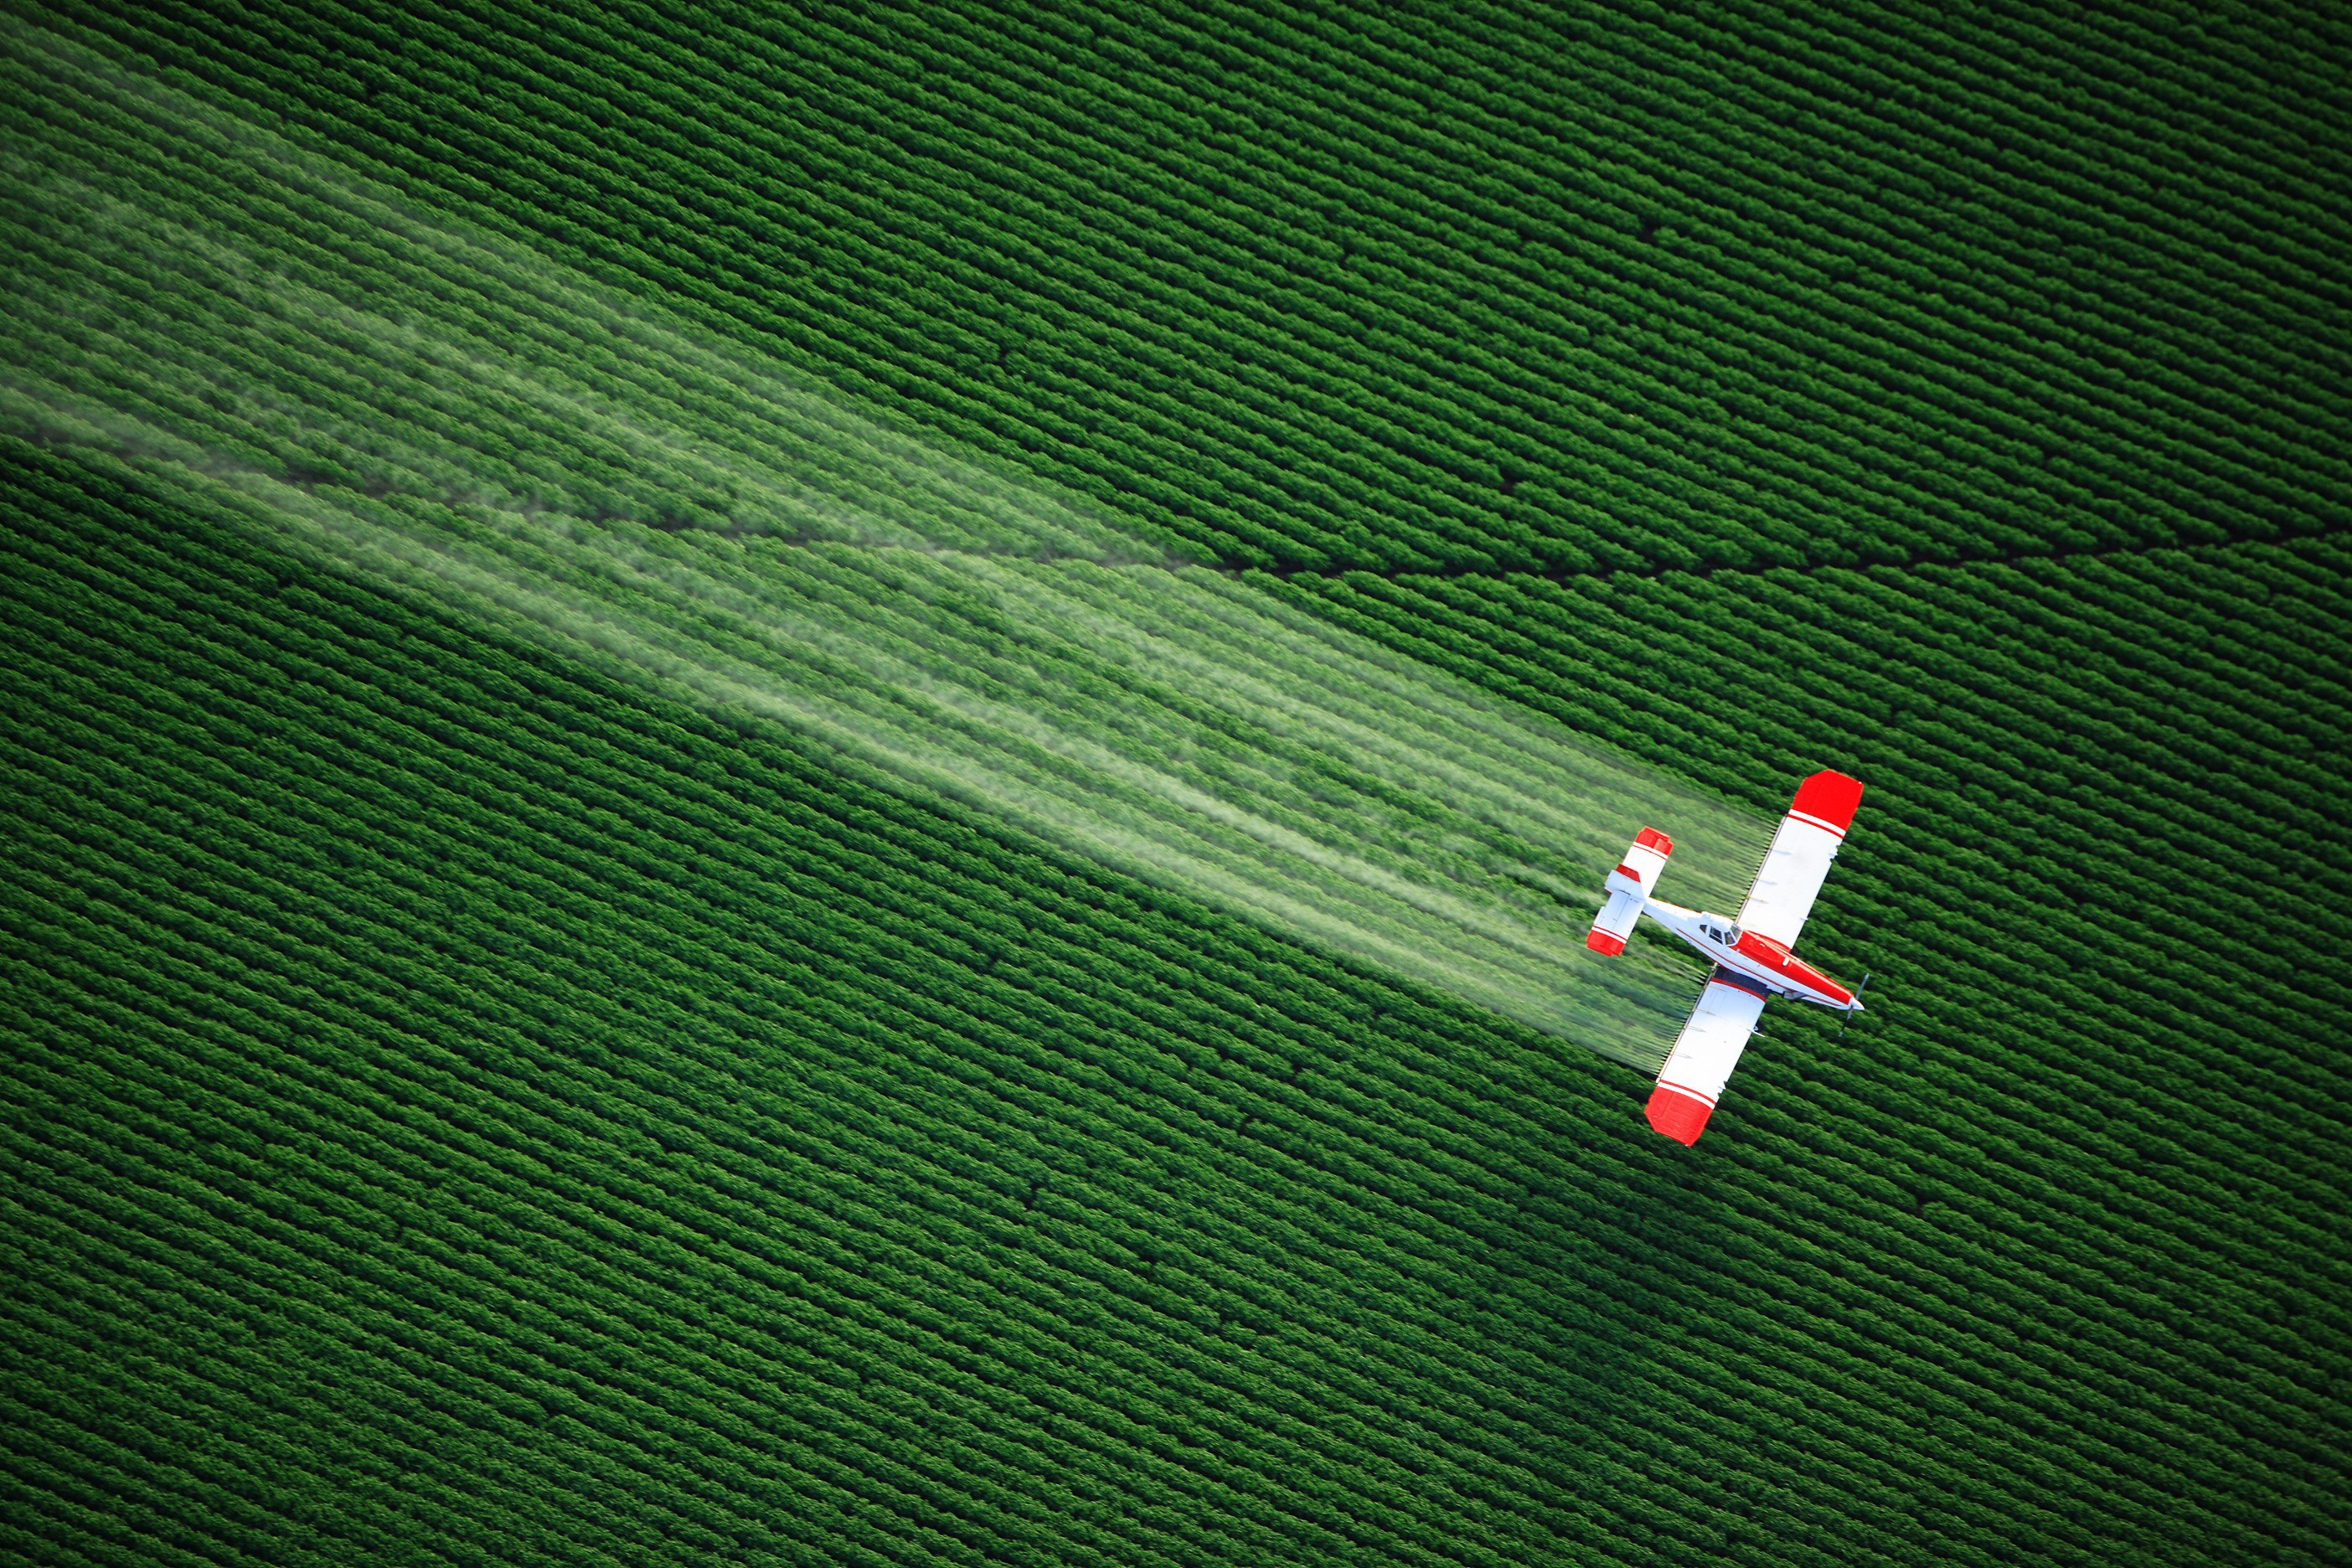 The aircraft spray fertilizer over the field wallpaper and image, picture, photo